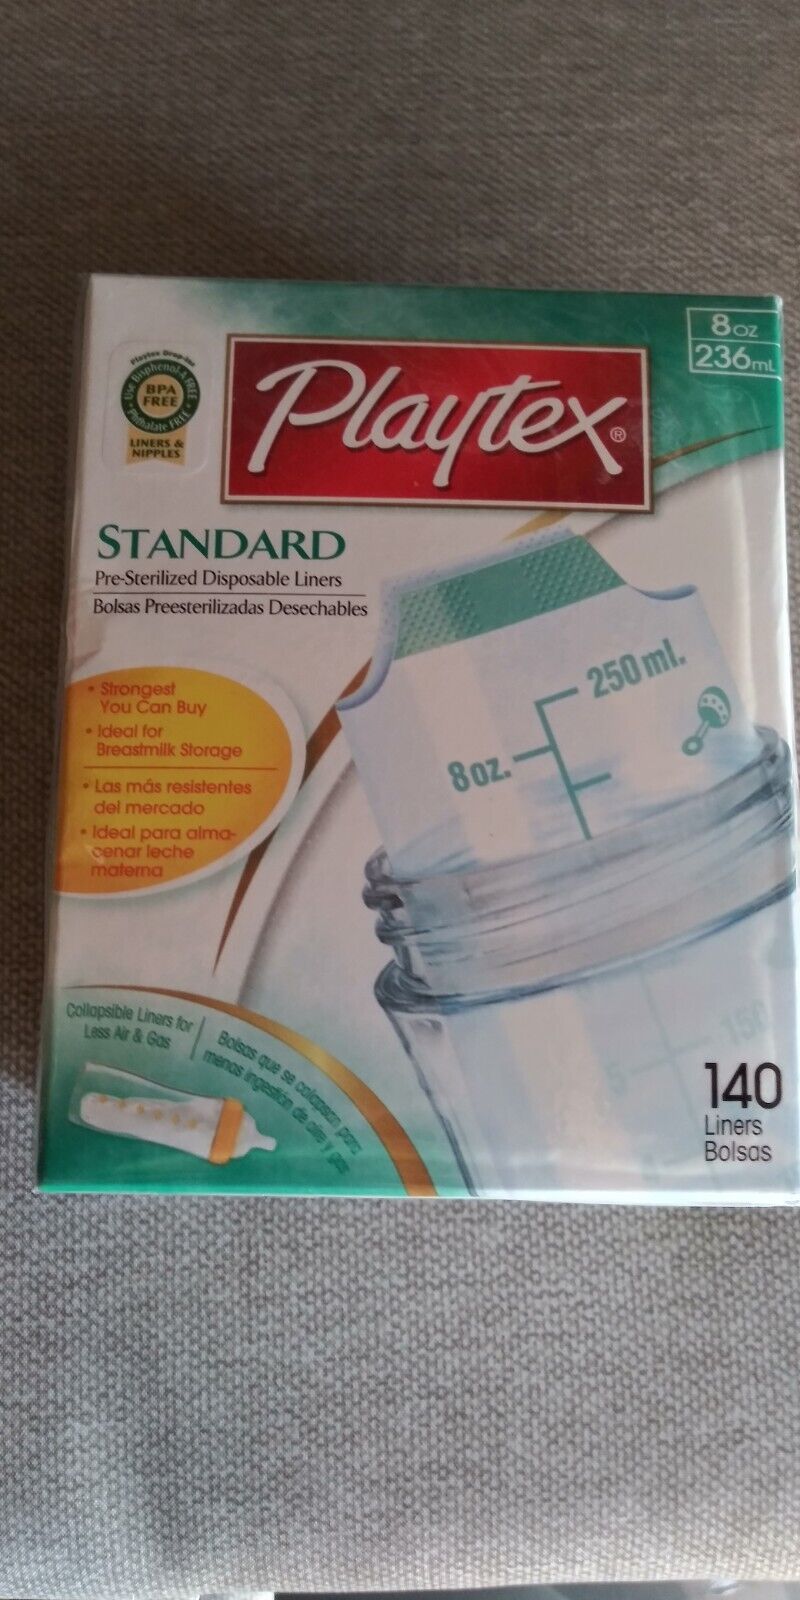 Playtex Standard Pre-steralized Disposable Liners 8oz